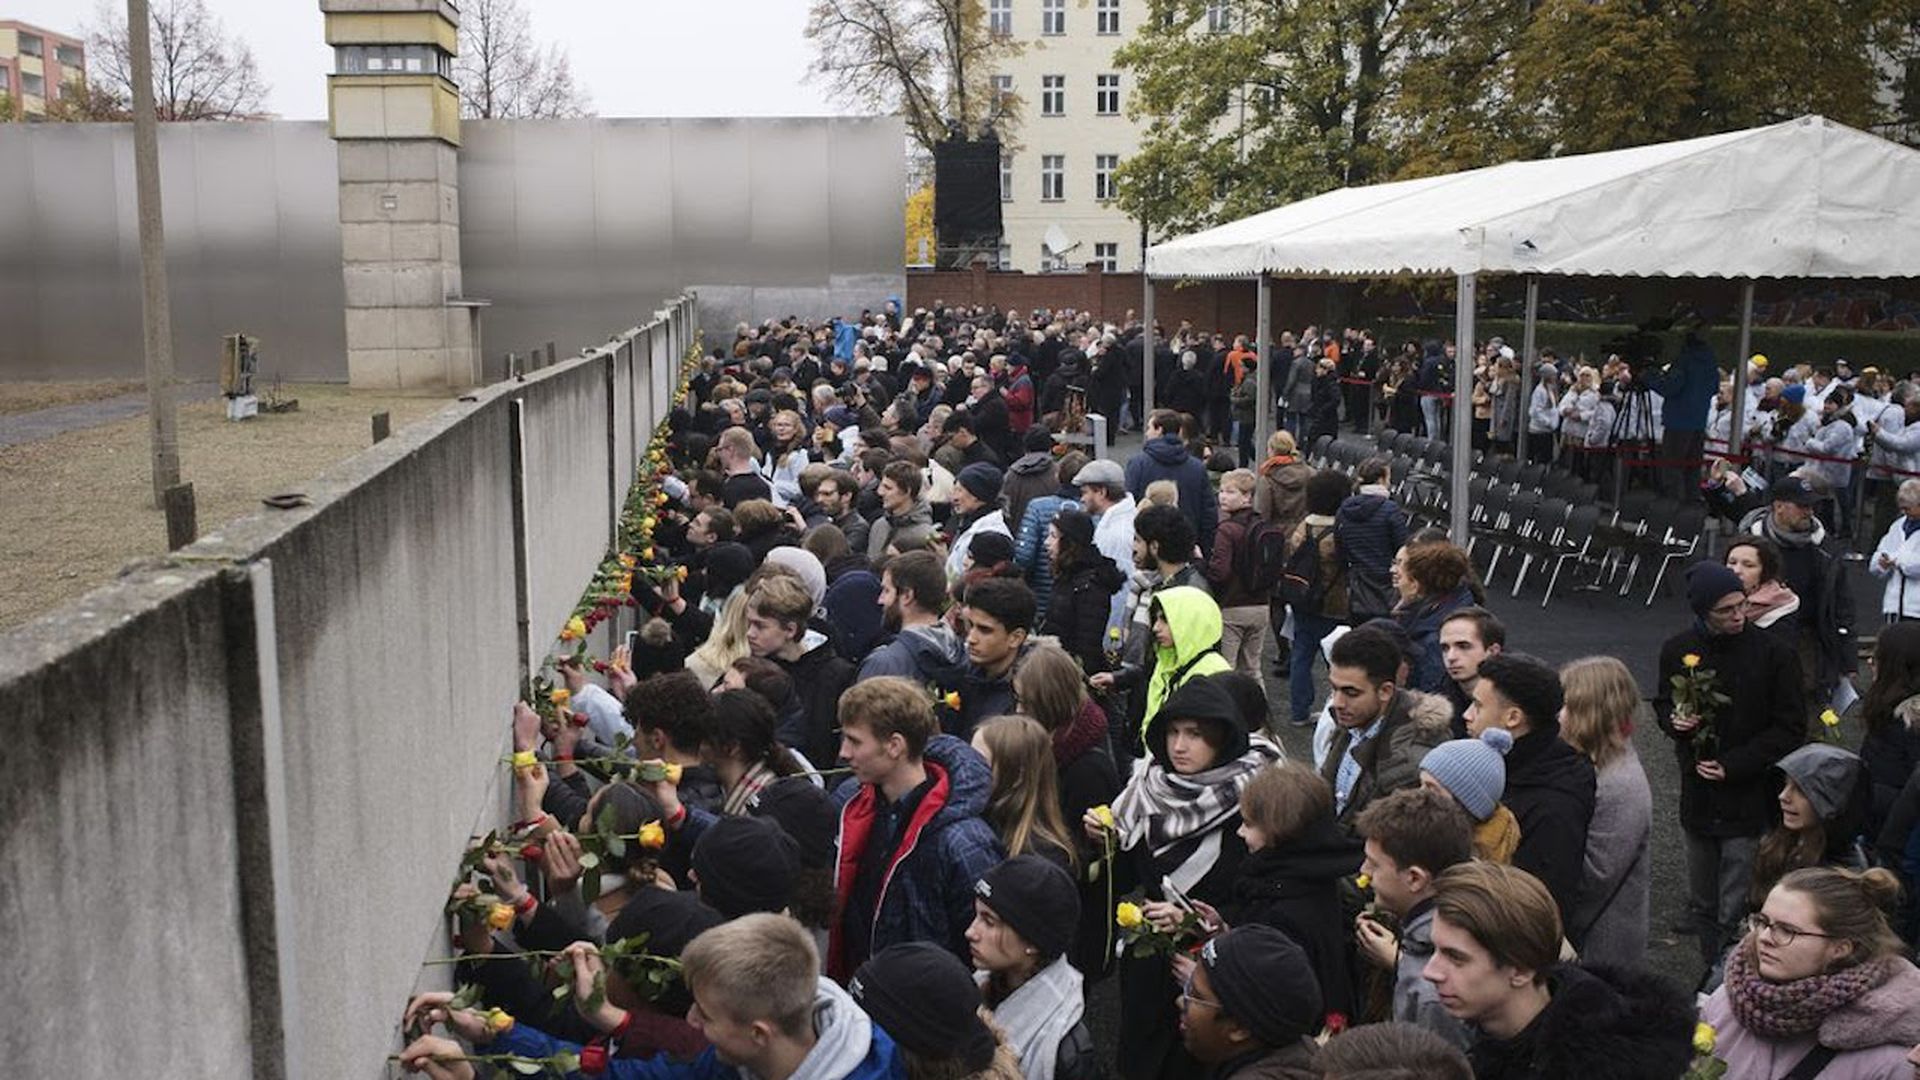 Young people stick flowers in remains of the Berlin Wall during a commemoration ceremony today